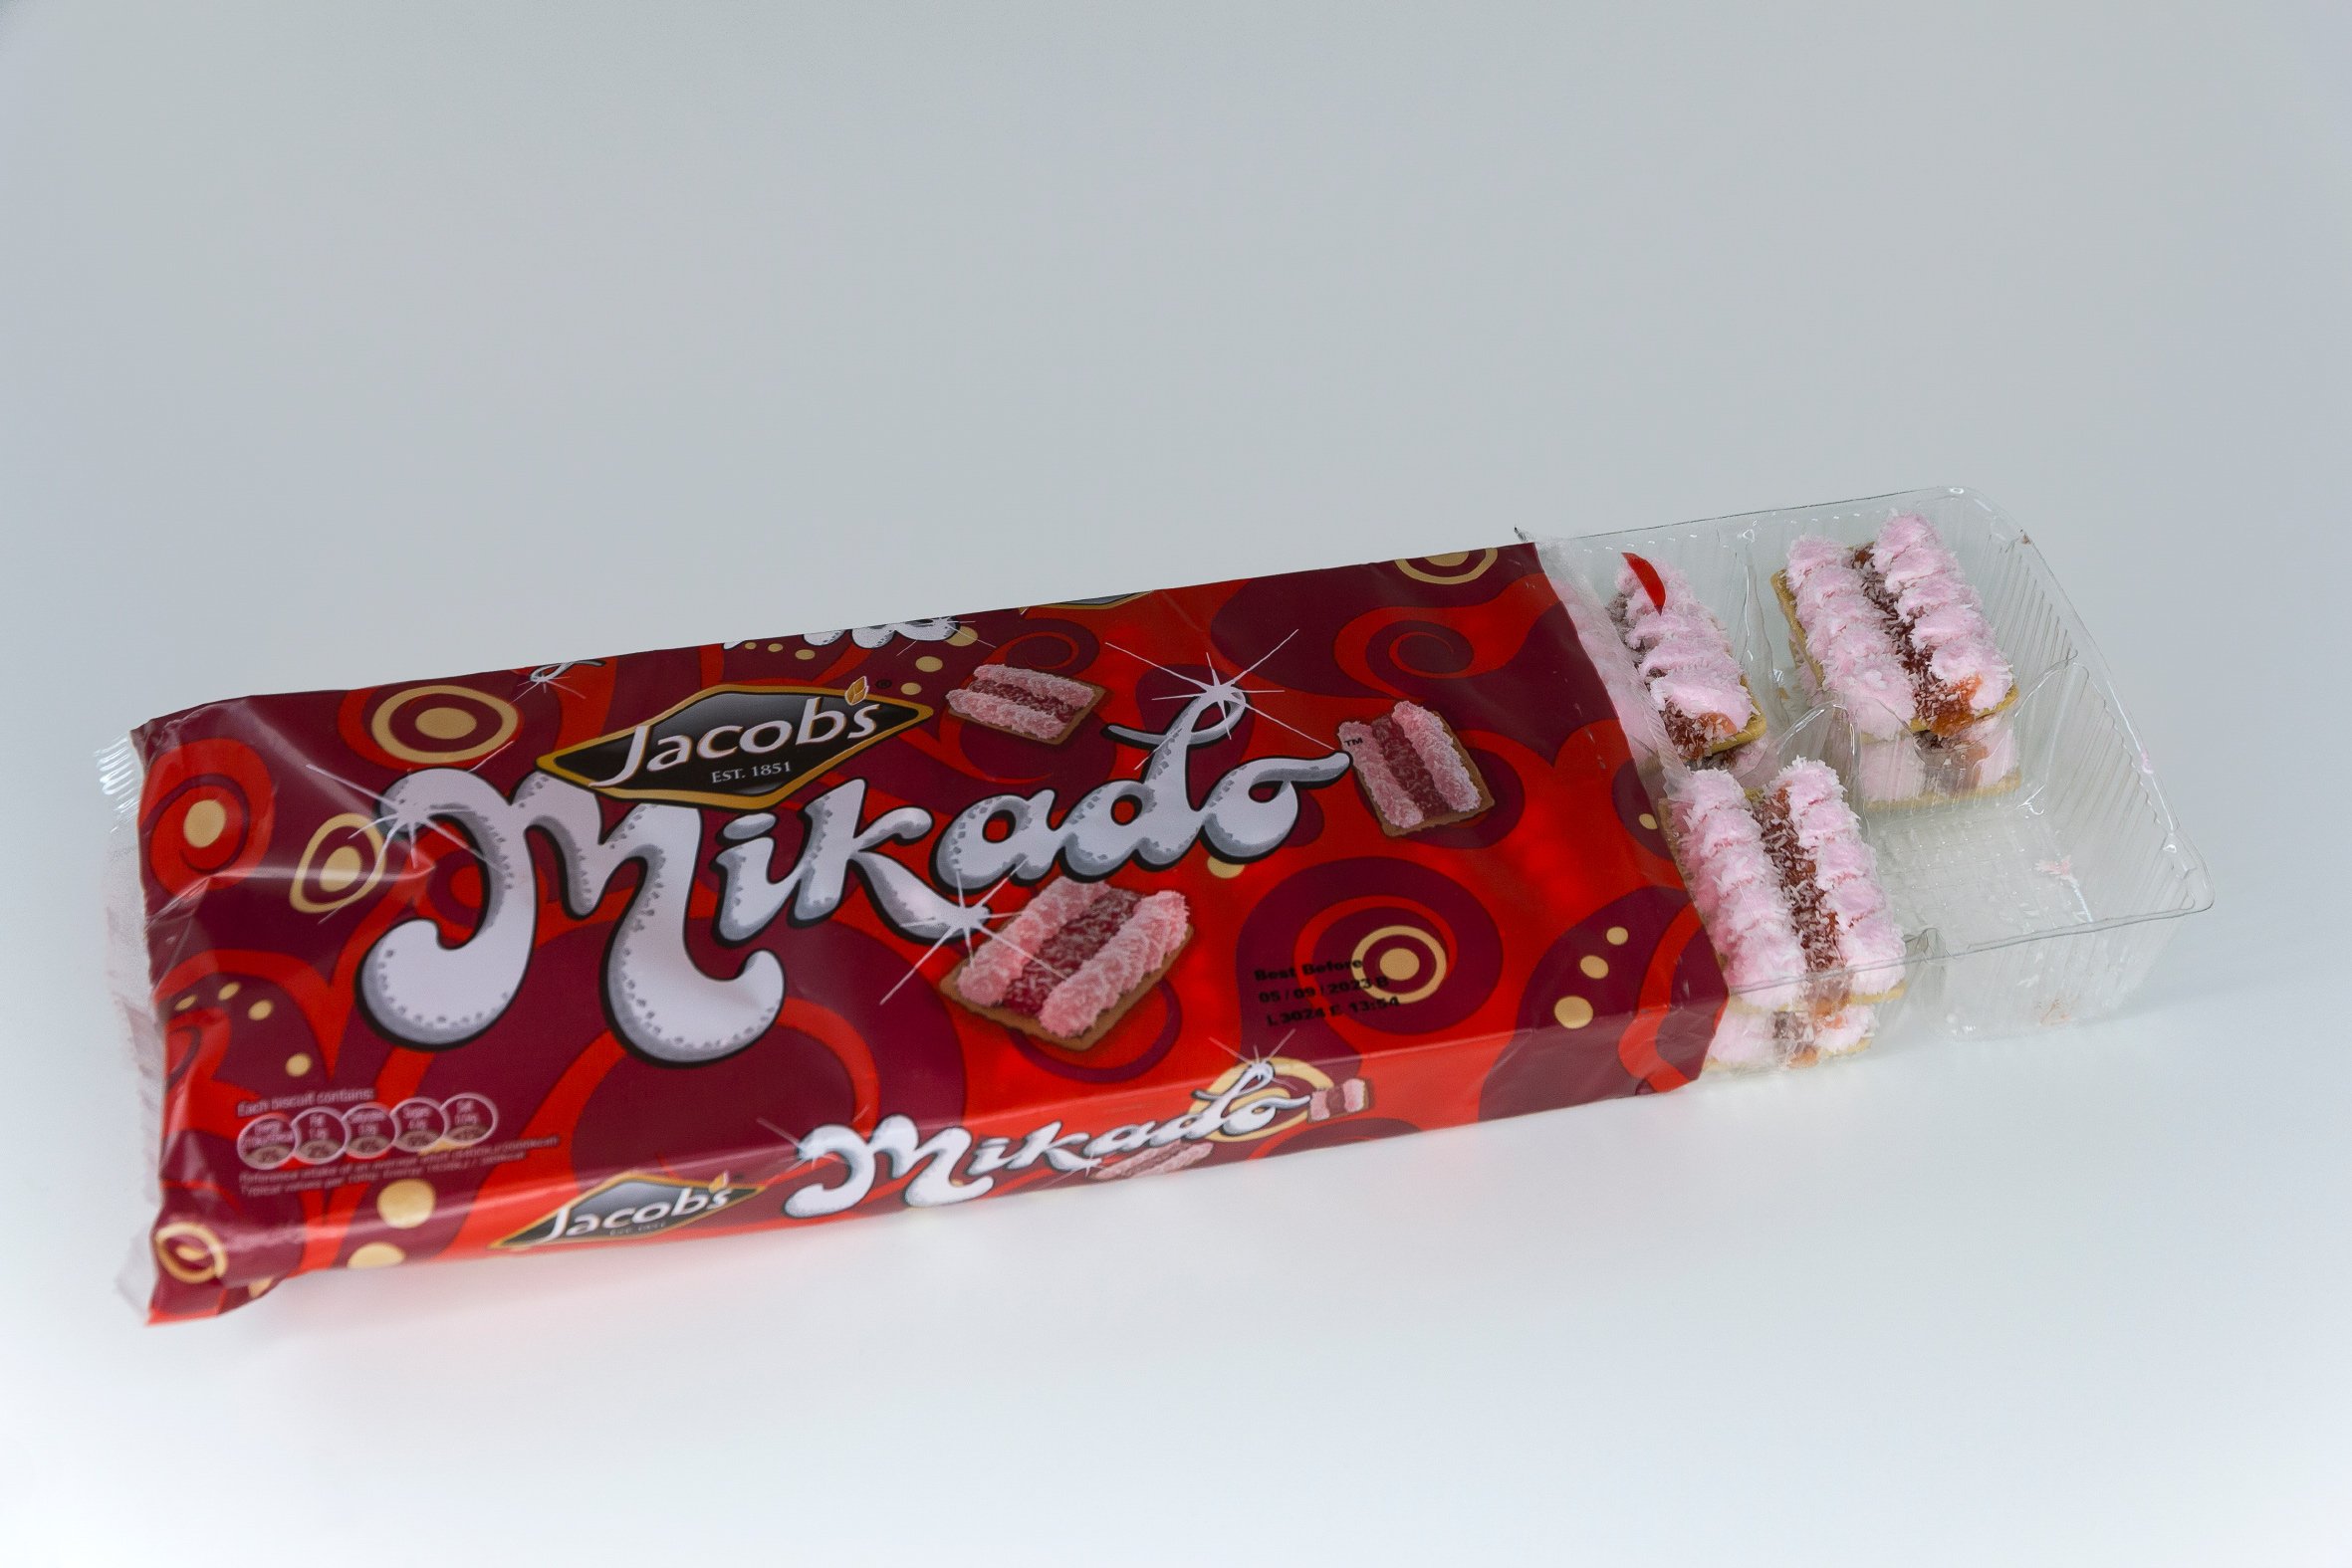  Packet of Jacob’s Mikado biscuits, for reference 